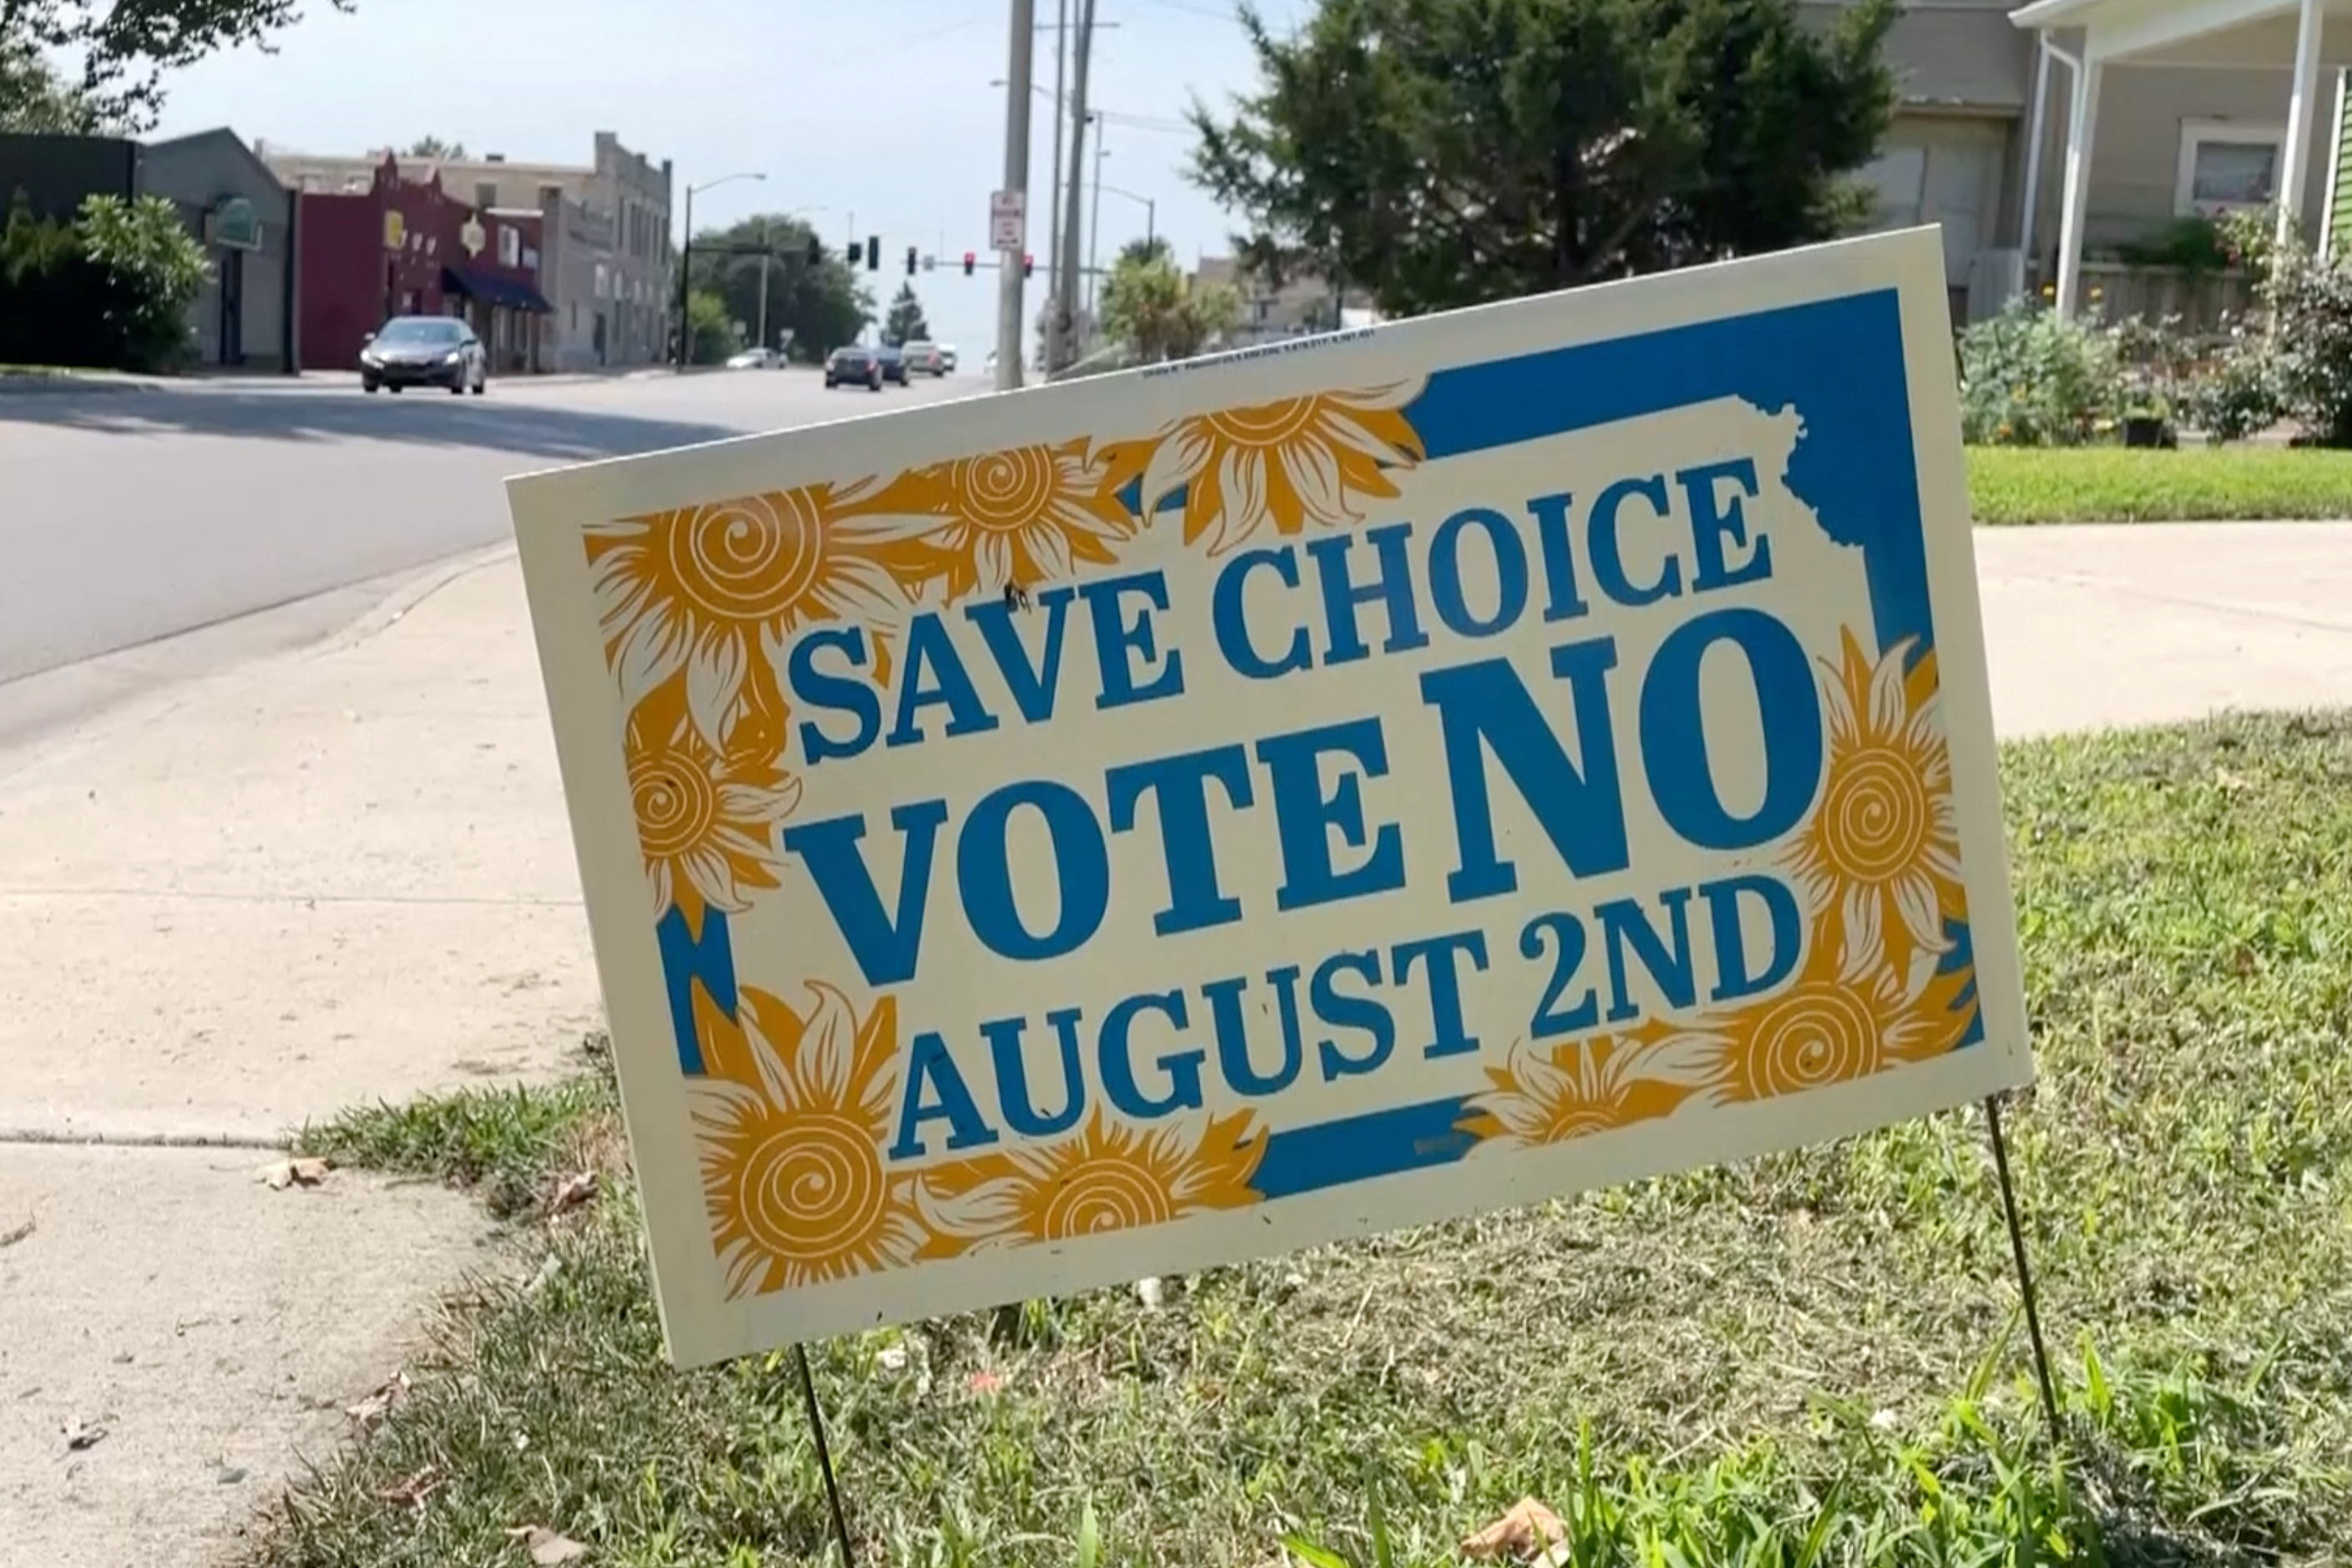 Primary Elections and Abortion Referendum in Kansas